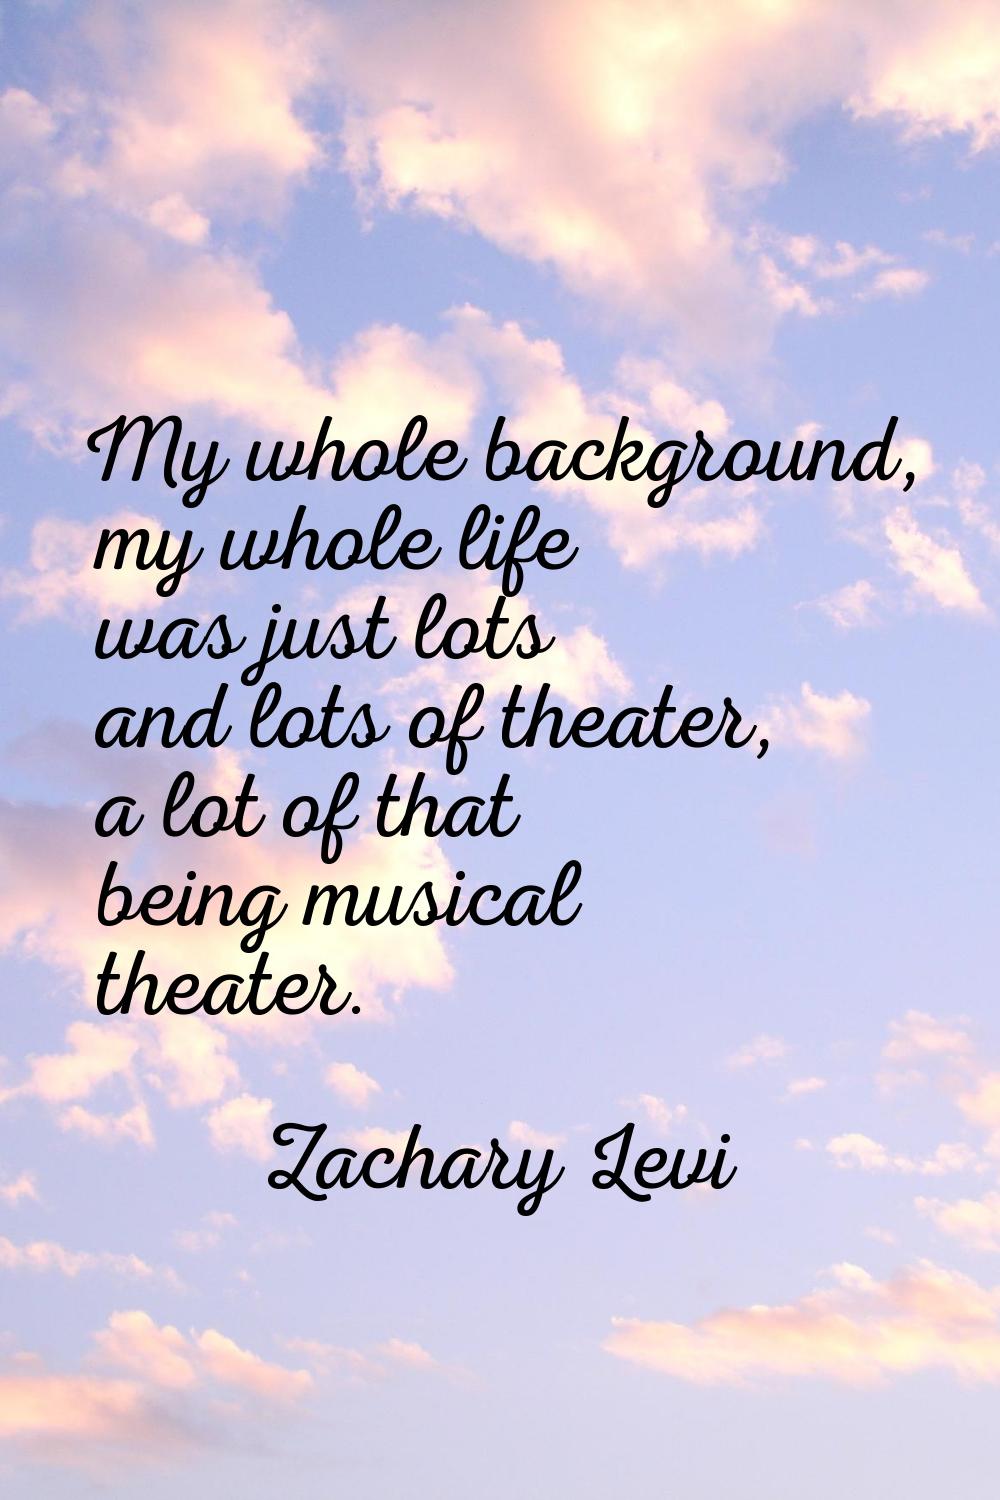 My whole background, my whole life was just lots and lots of theater, a lot of that being musical t